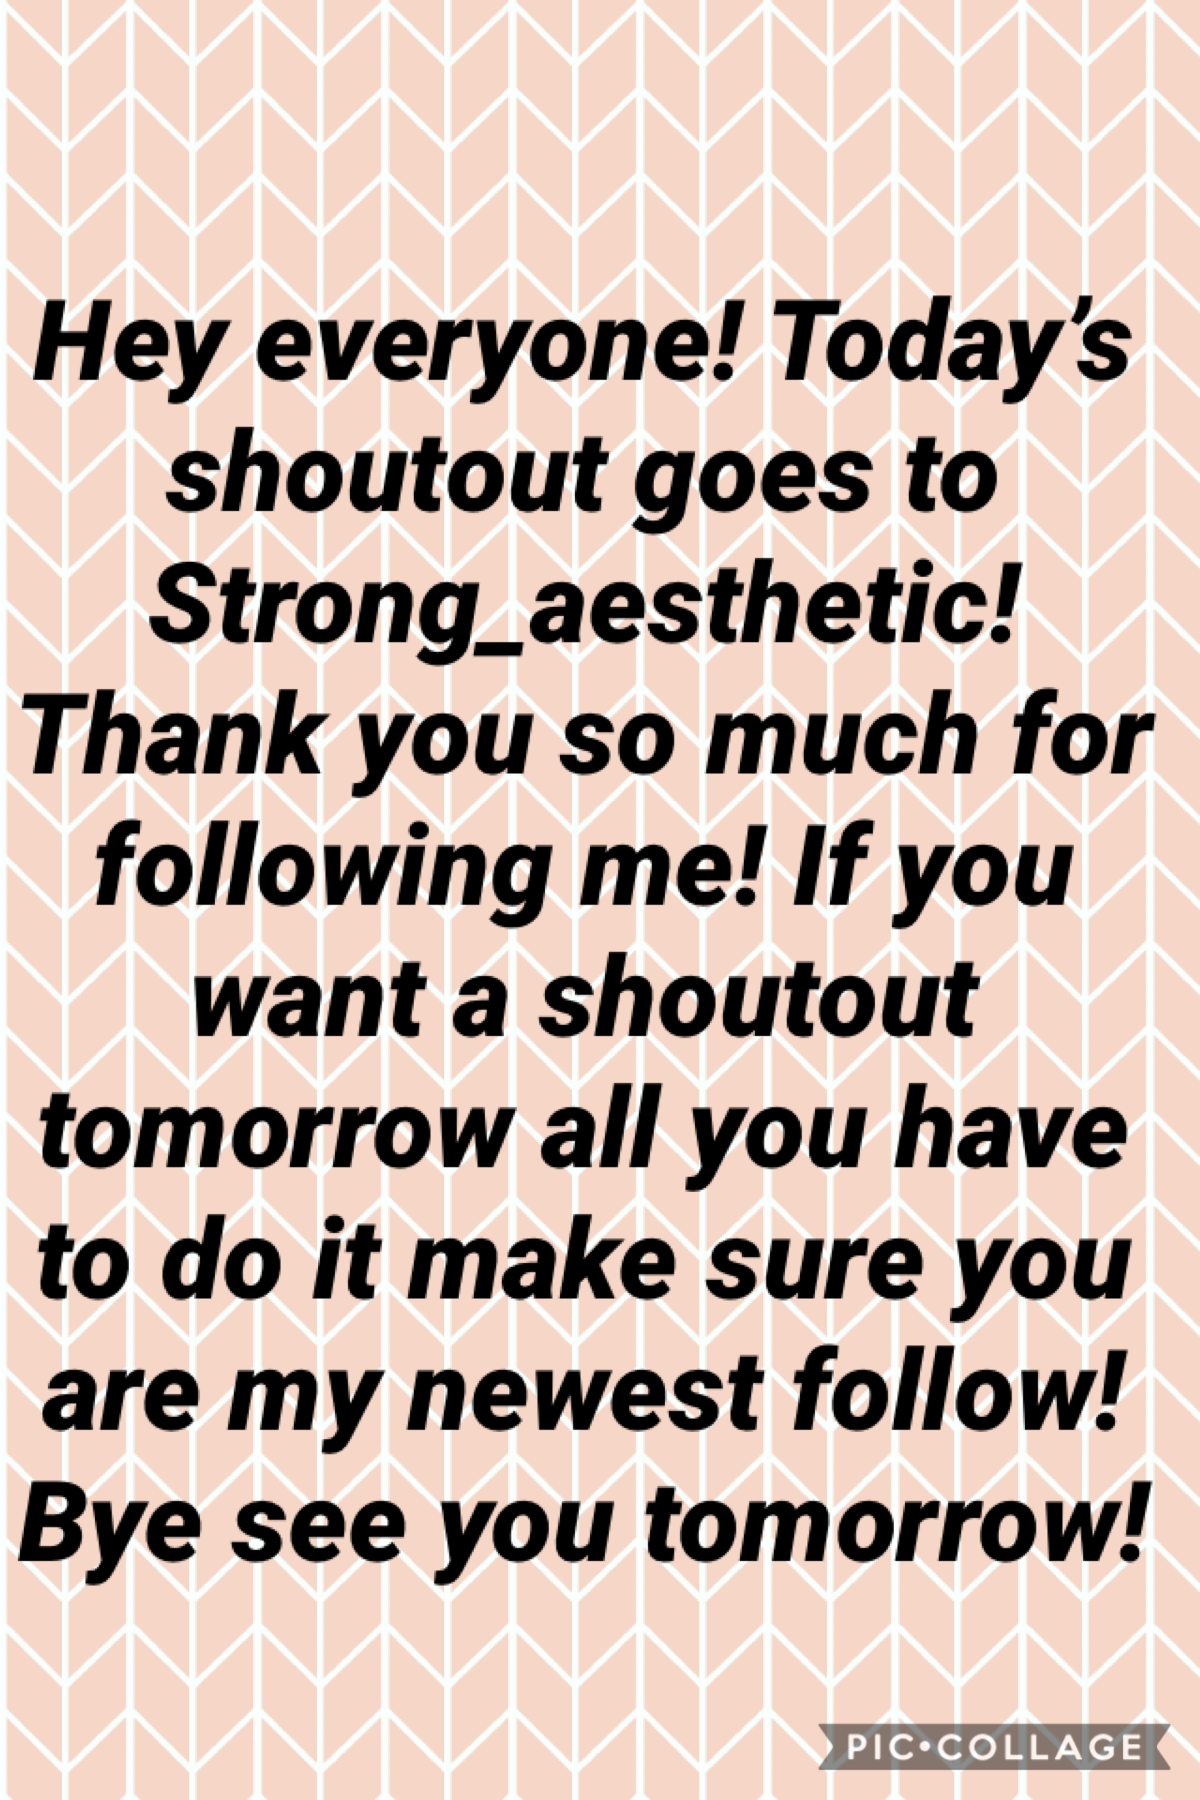 Make sure you are my newest follow by tomorrow to get a shoutout!